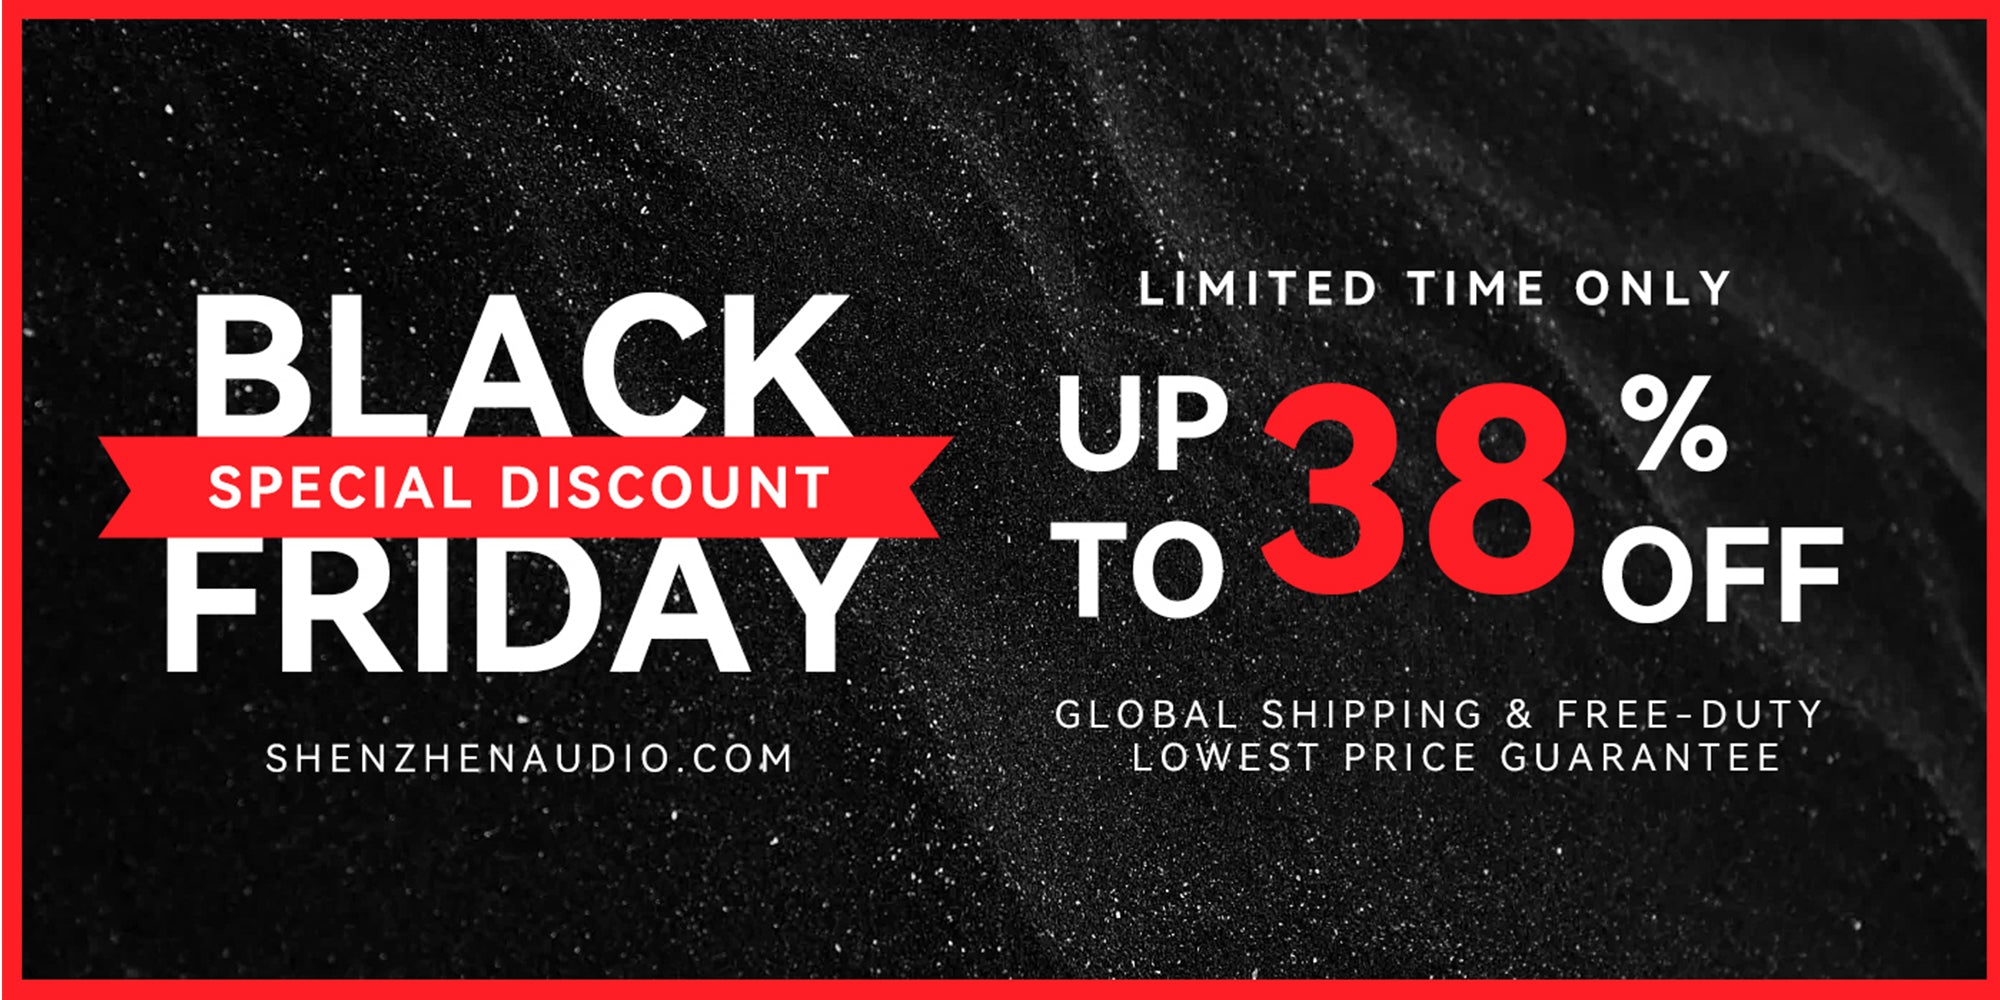 Black Friday Deals: Up to 38% OFF